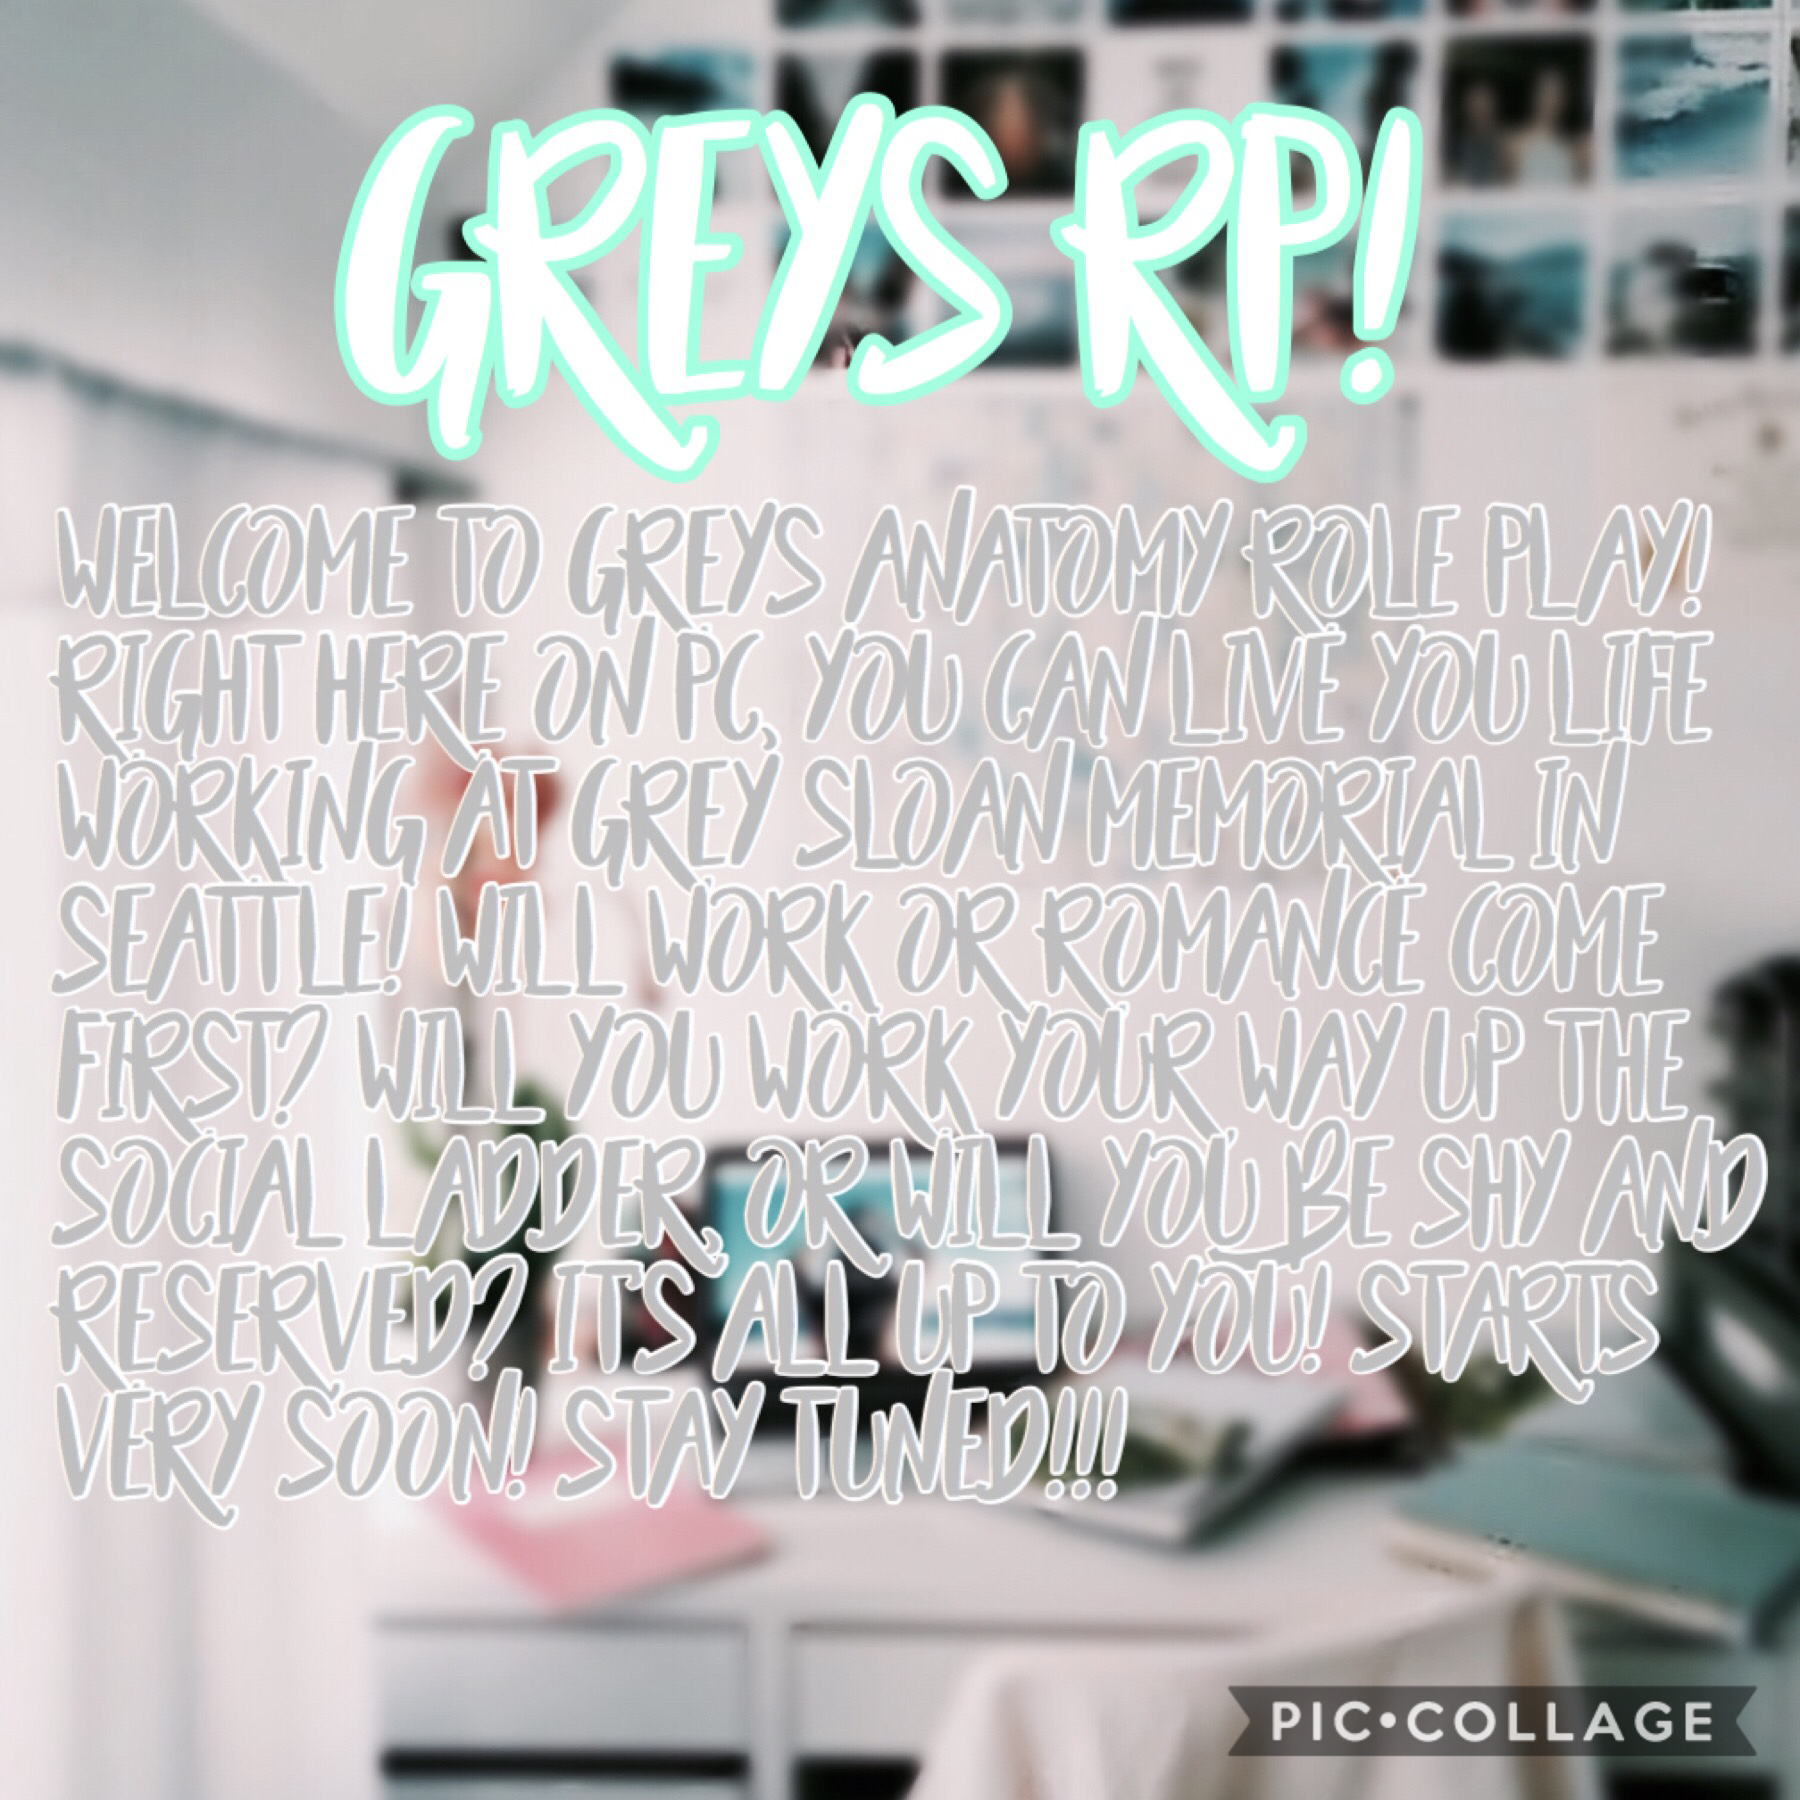 TAP
Welcome! Applications to work at Grey Sloan Memorial will be our later today. Please chat and introduce yourself now, it may help you get a good job later!!